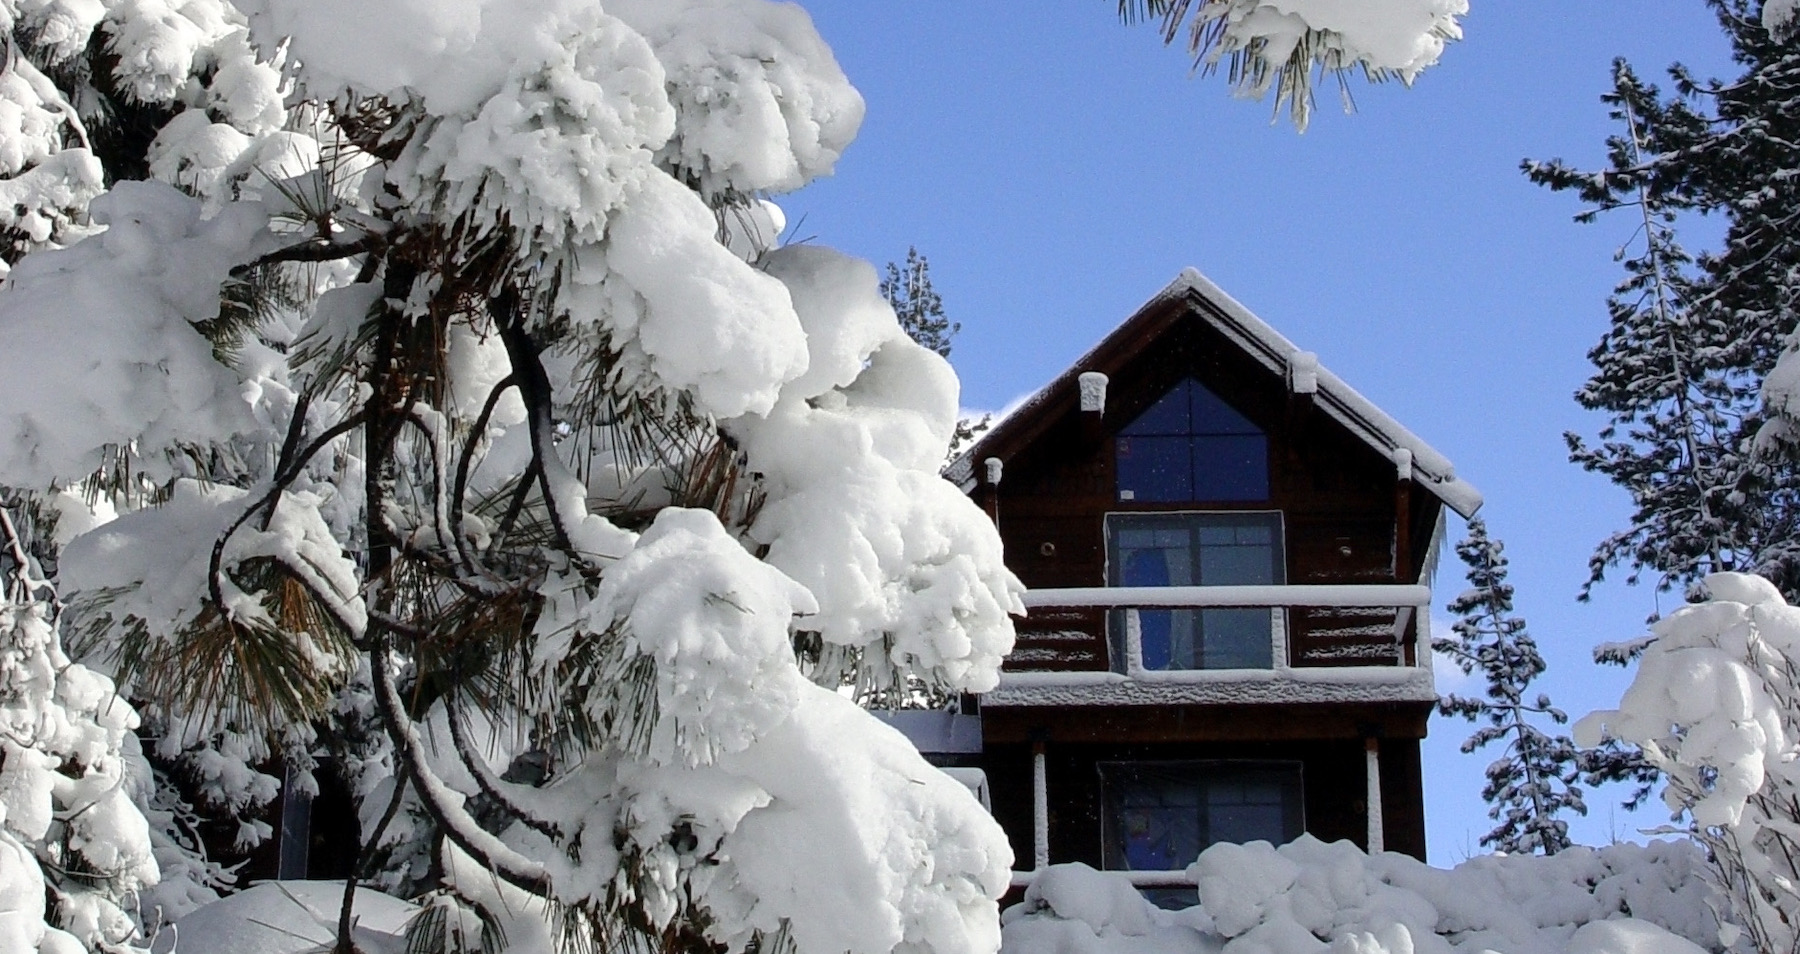 If I were selling my home in winter, here's what I would do